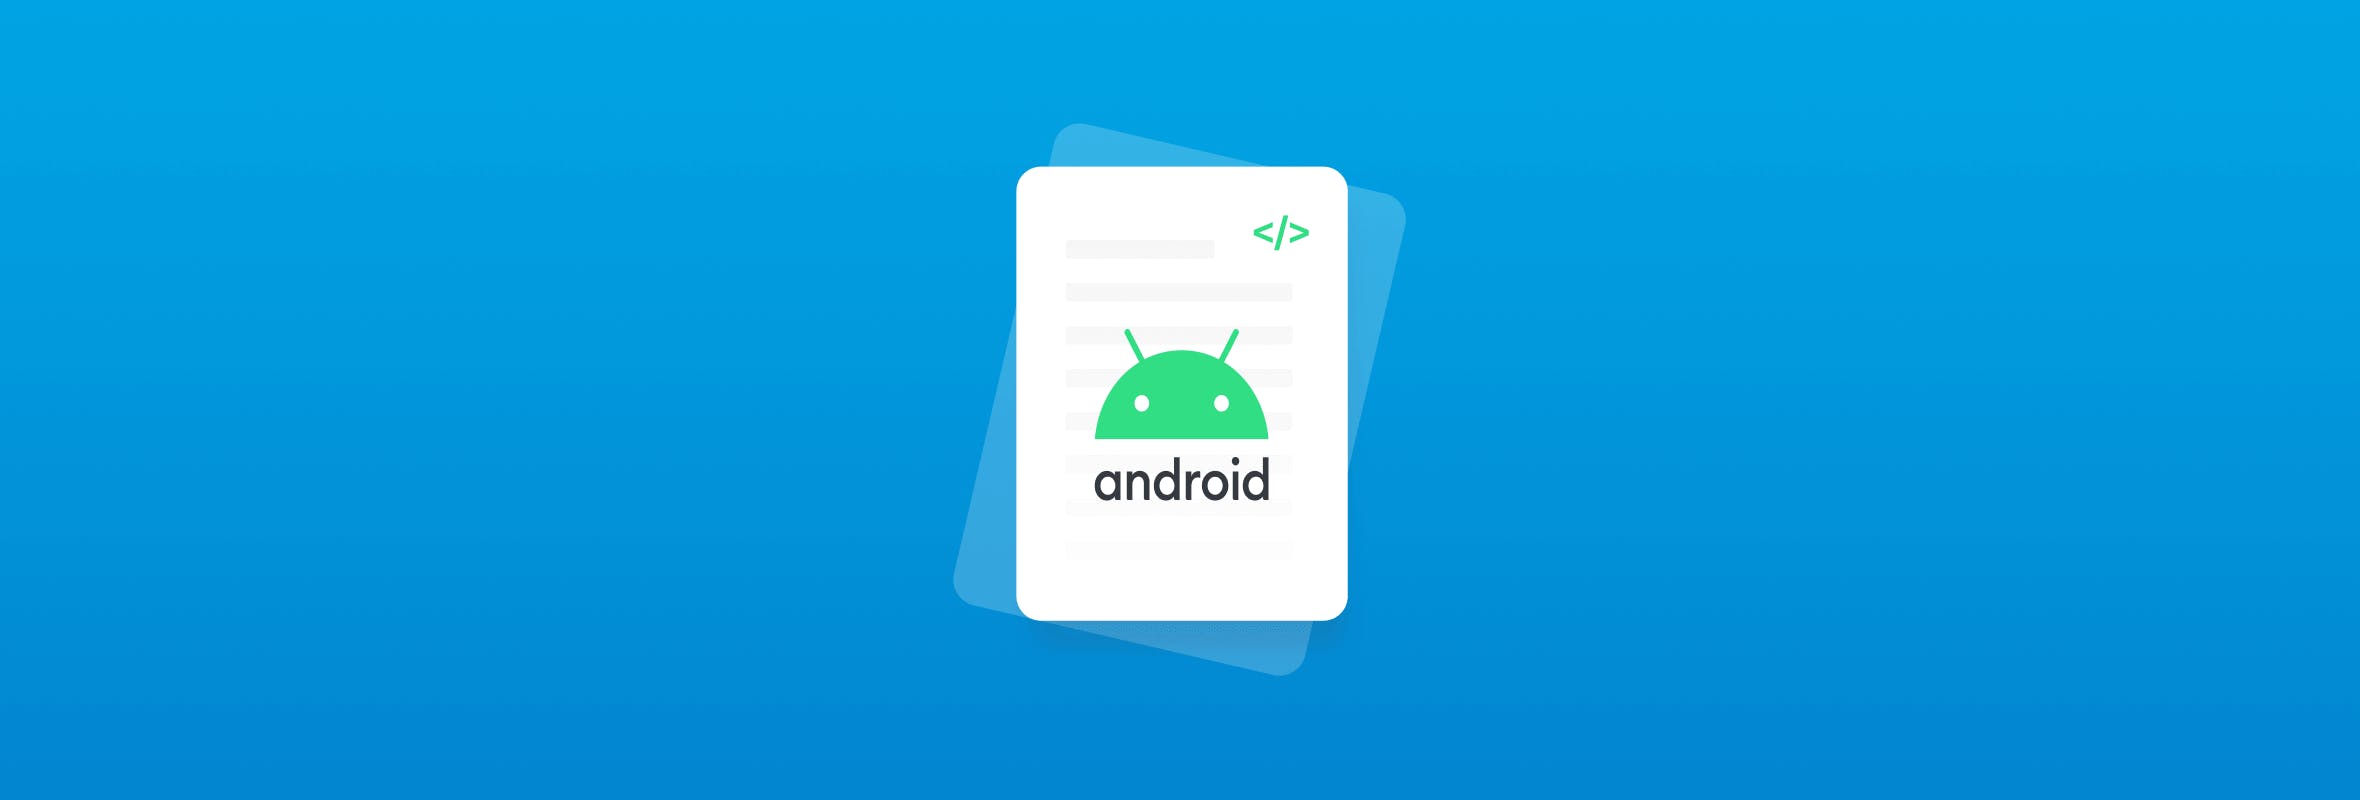 Android blog banner hero image